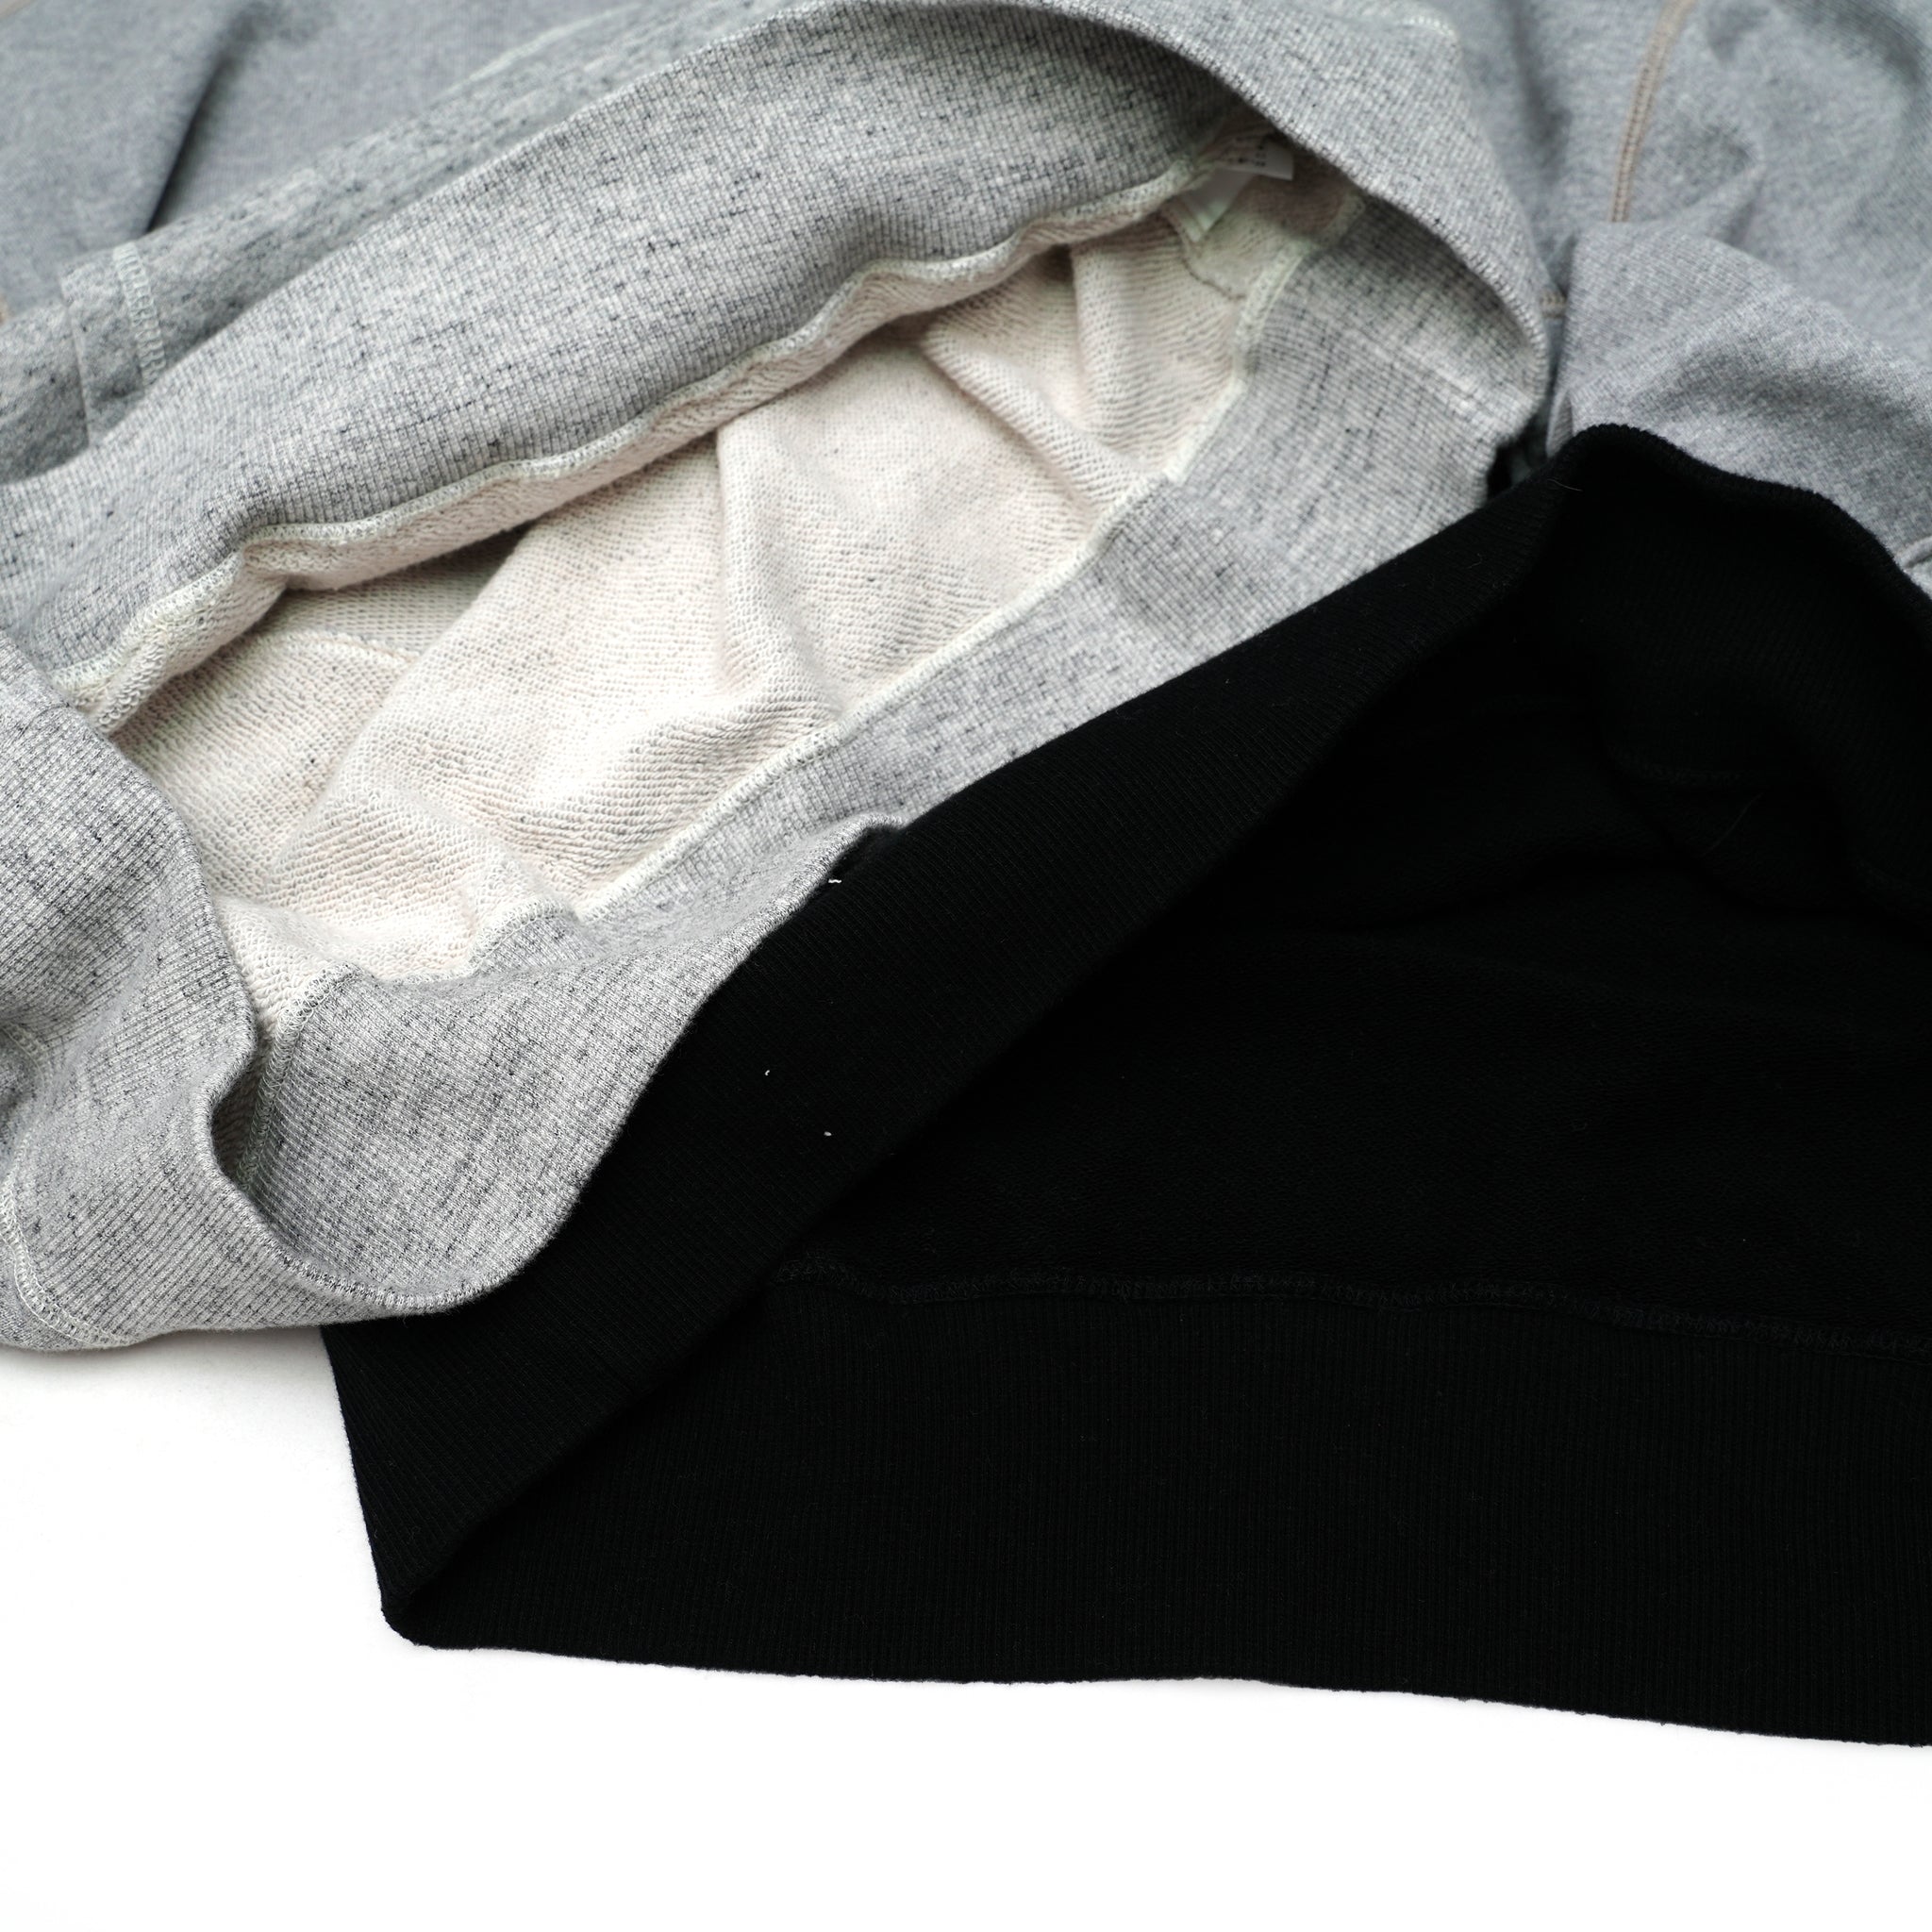 No:tb-sw0212 | Name:ALL ROUND TRANER 2 | Color:Gray/Black【TRAINERBOYS_トレーナーボーイズ】